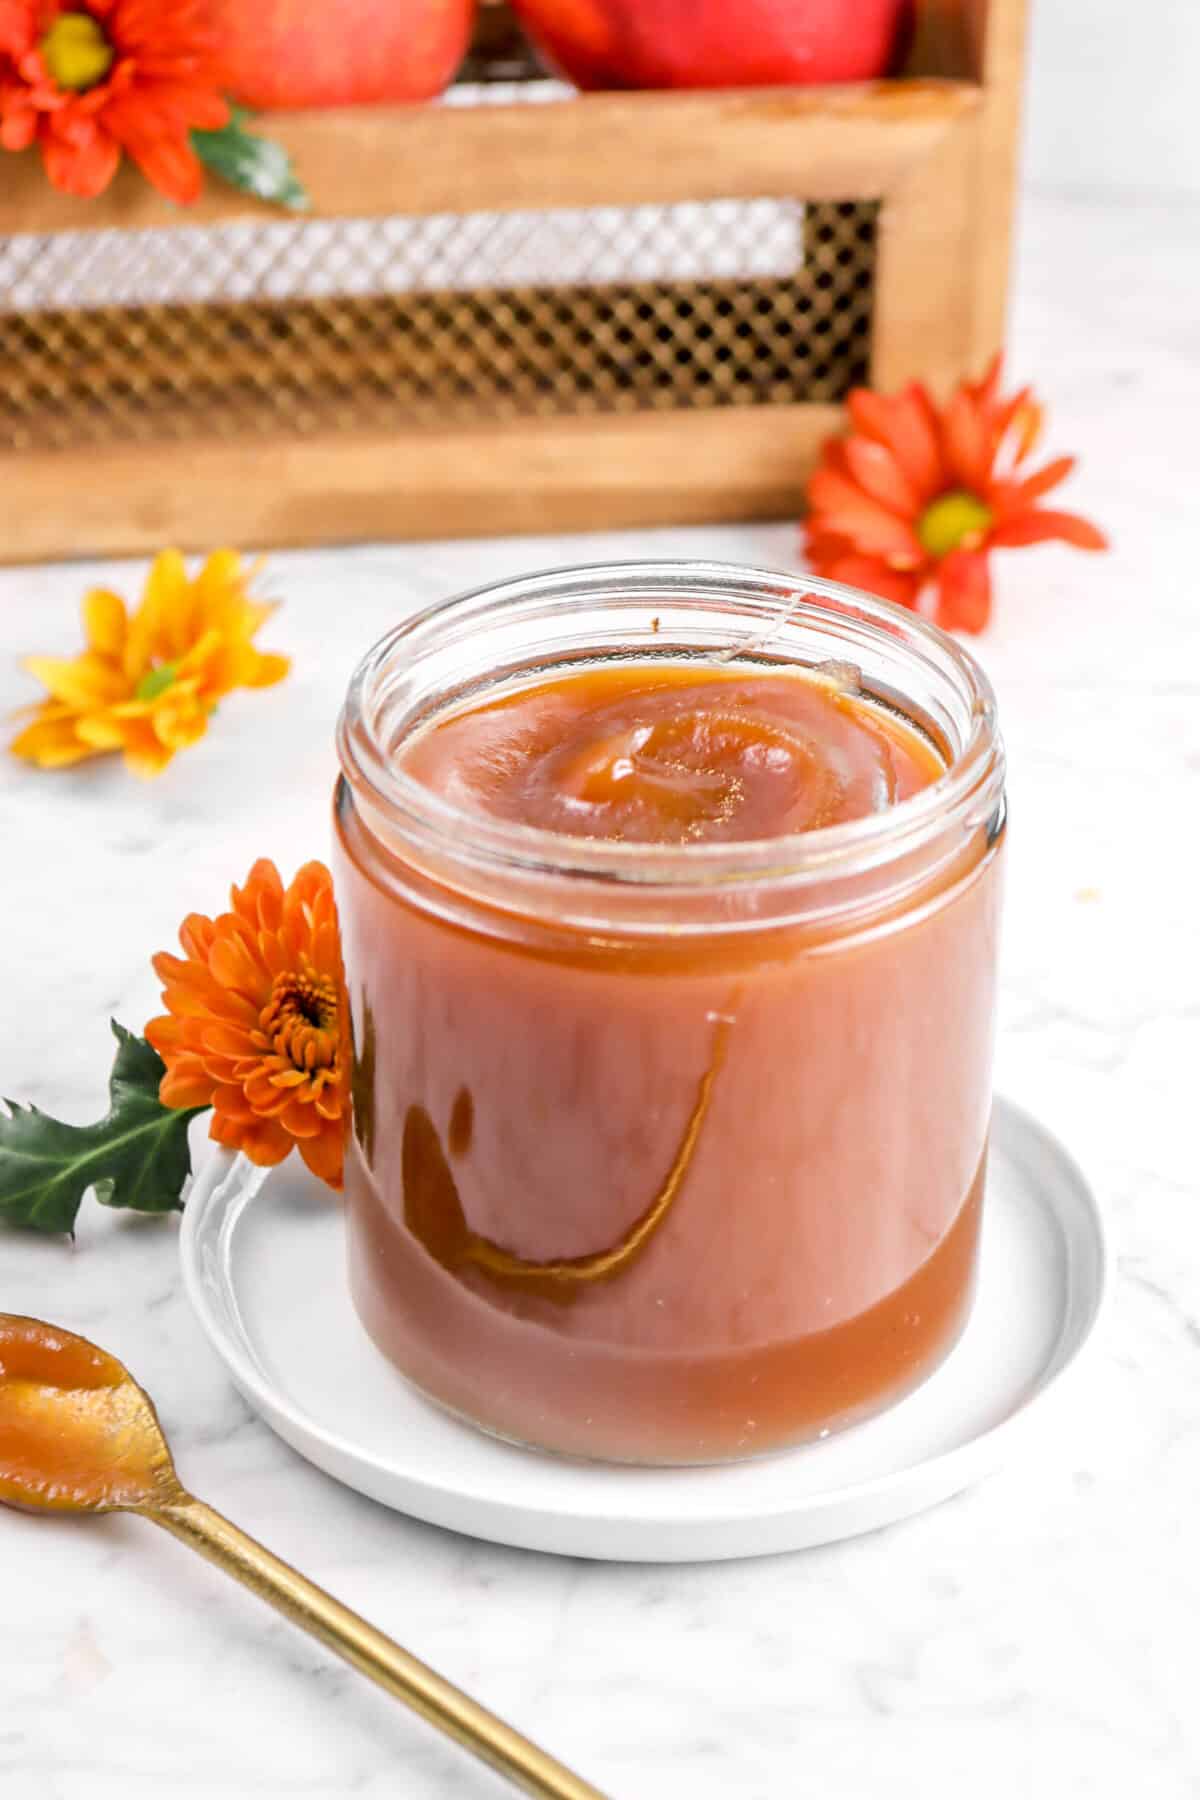 apple butter in a glass jar on a white plate with flowers